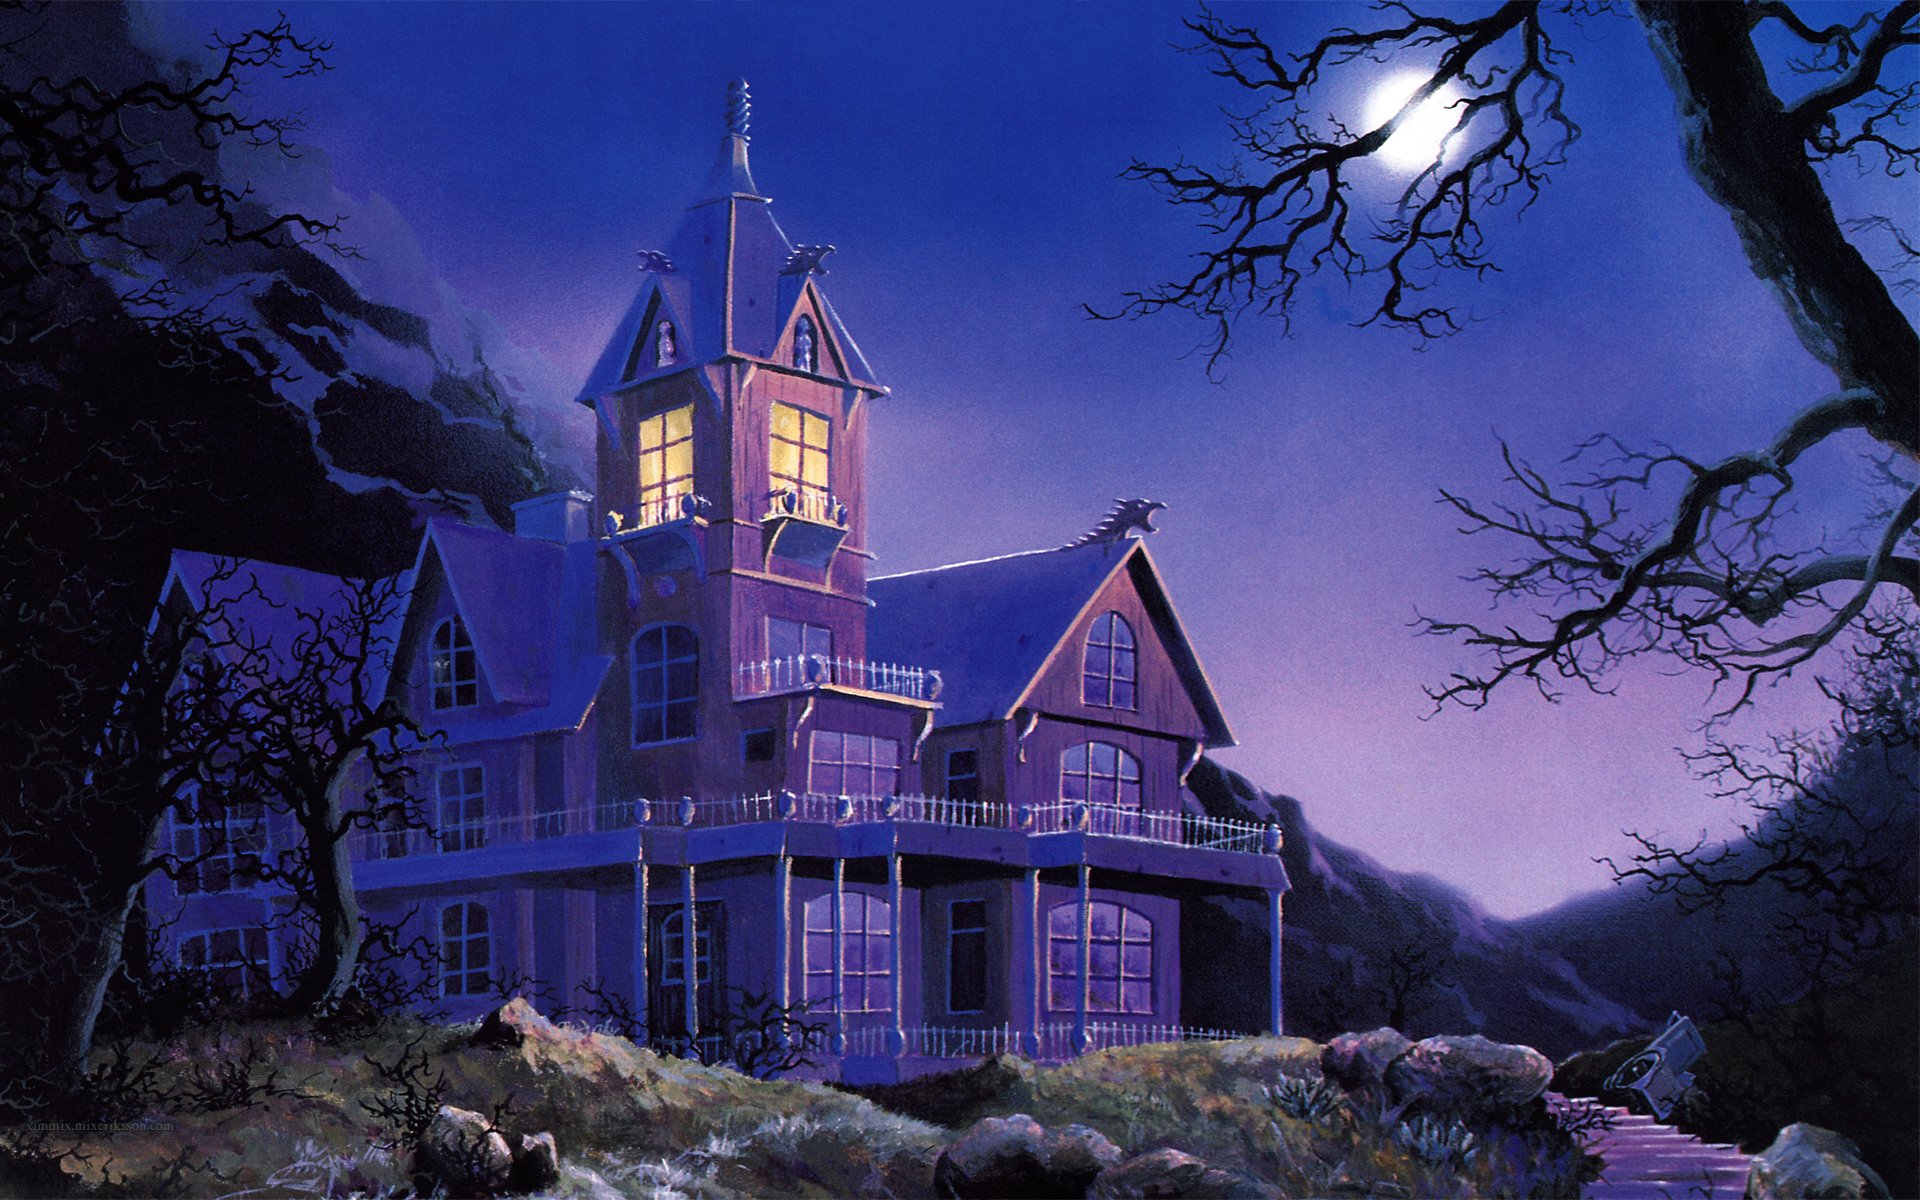 35 Haunted House Hd Wallpapers Background Images Wallpaper Abyss Images, Photos, Reviews